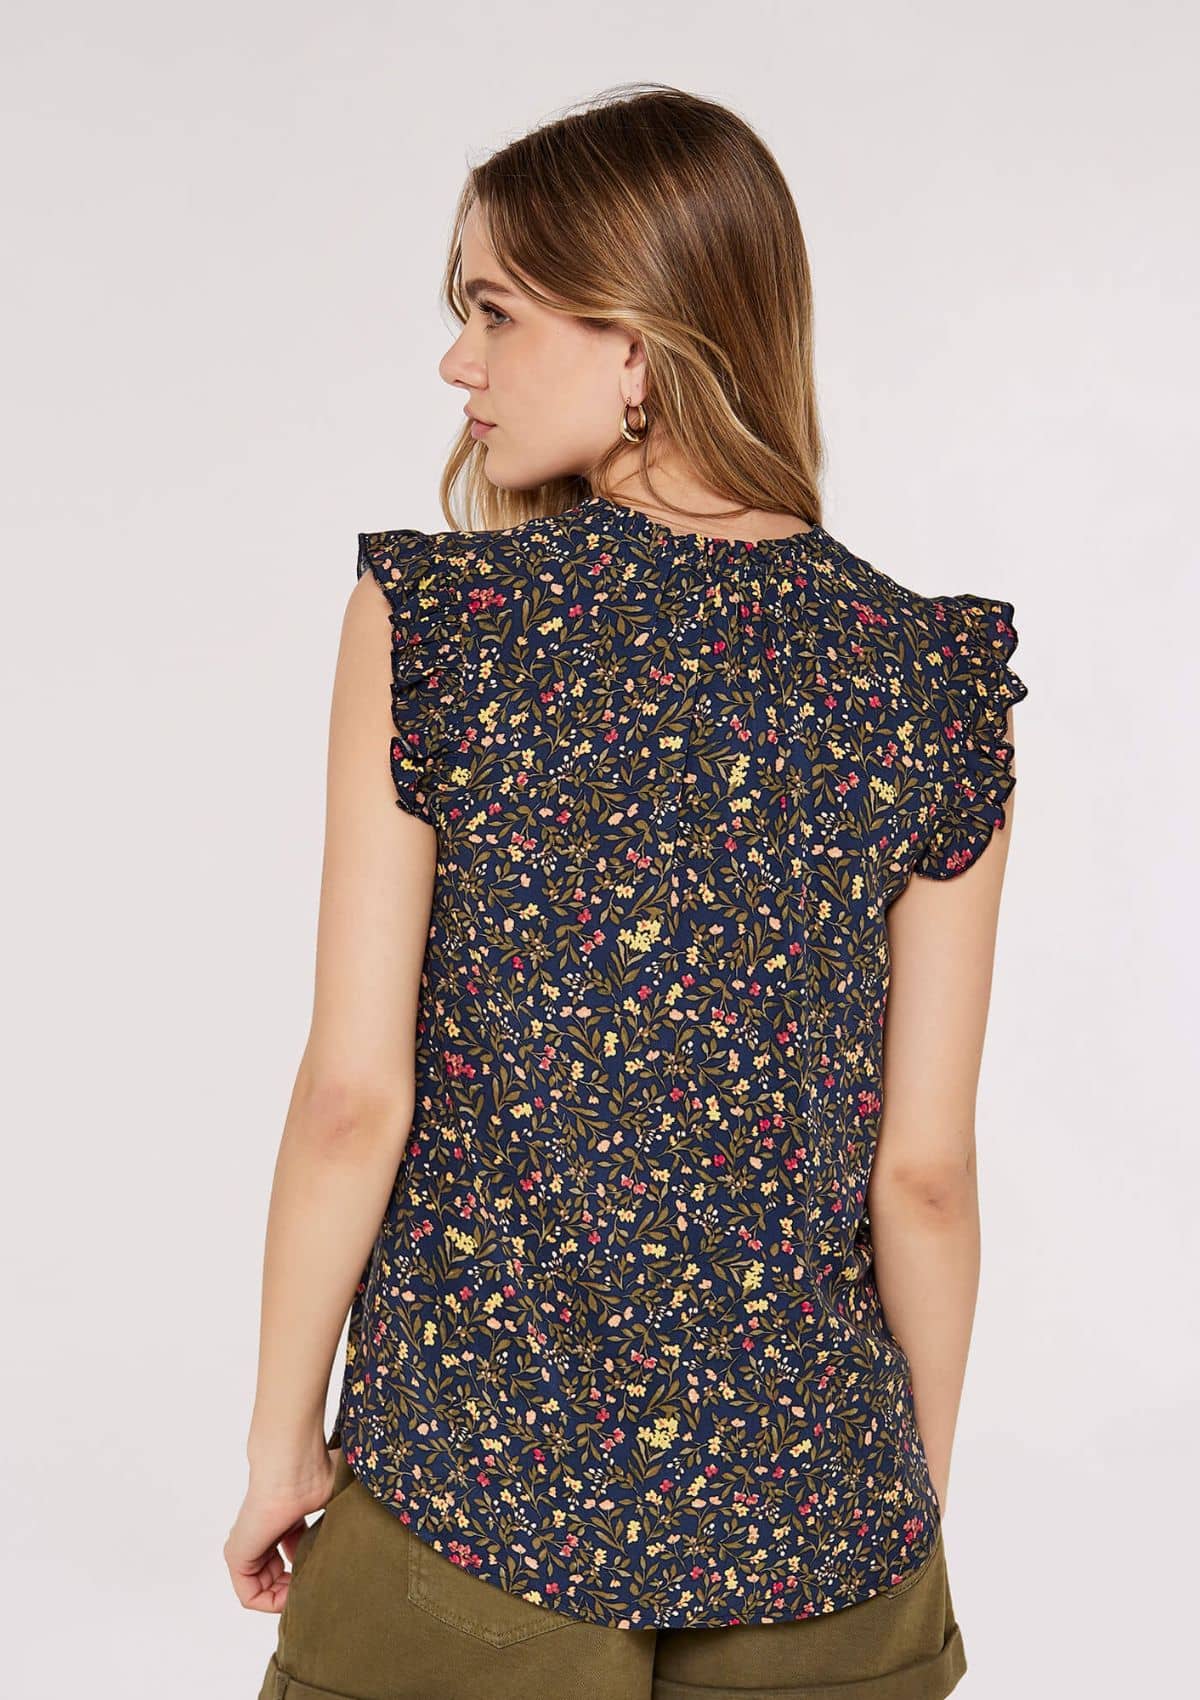 Ruffle short sleeves and neckline hem. Yellow pink floral print.